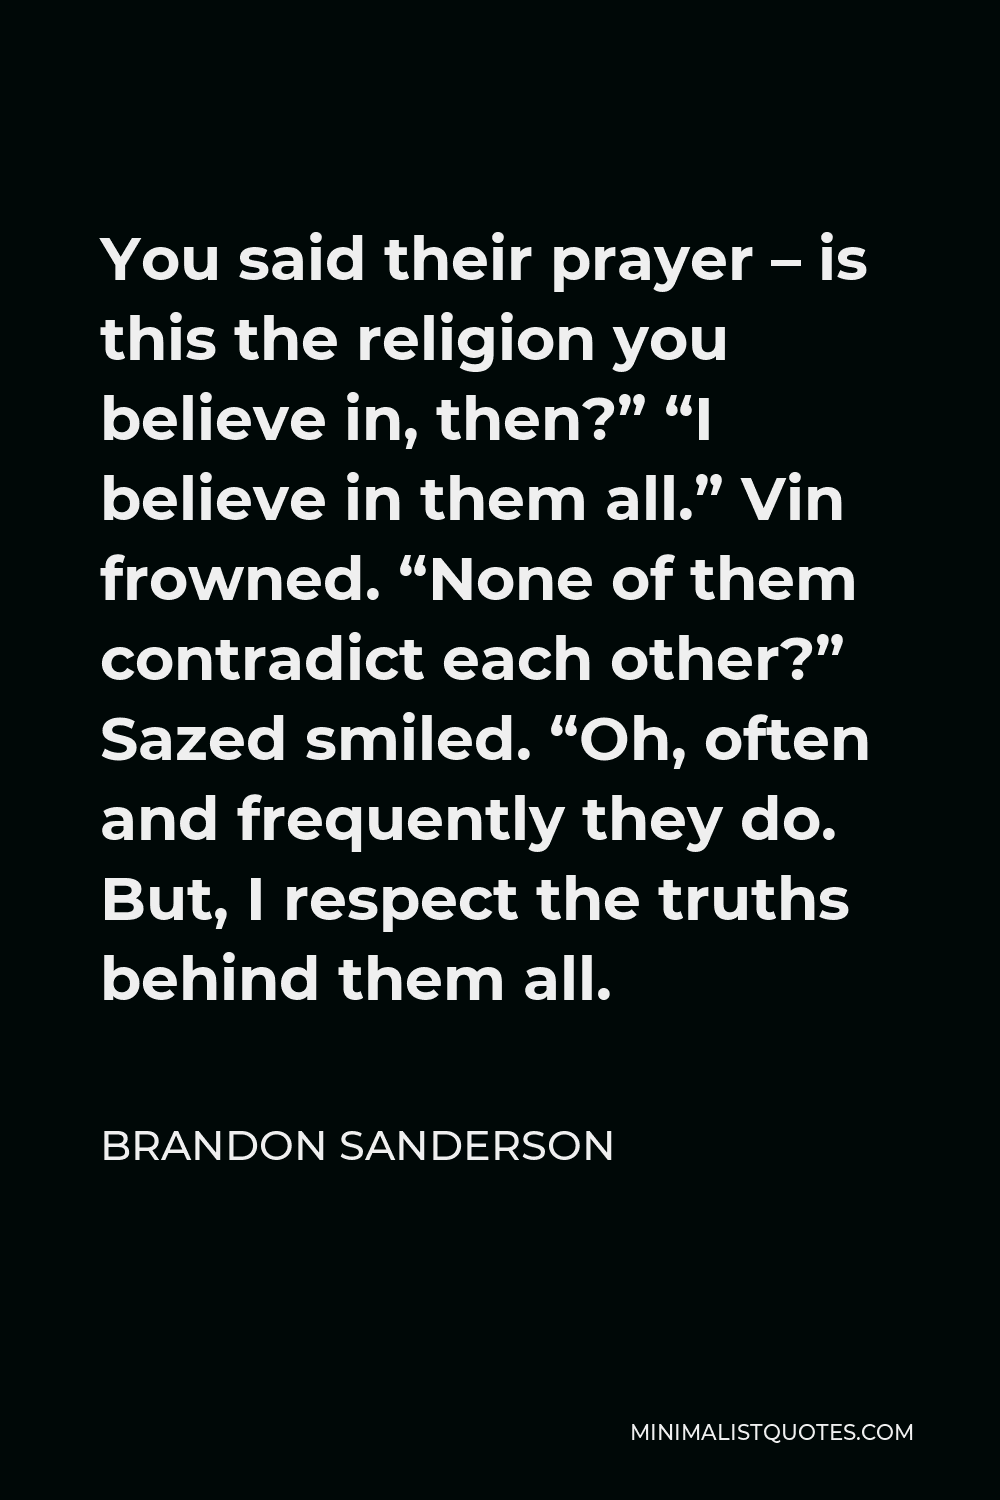 Brandon Sanderson Quote - You said their prayer – is this the religion you believe in, then?” “I believe in them all.” Vin frowned. “None of them contradict each other?” Sazed smiled. “Oh, often and frequently they do. But, I respect the truths behind them all.